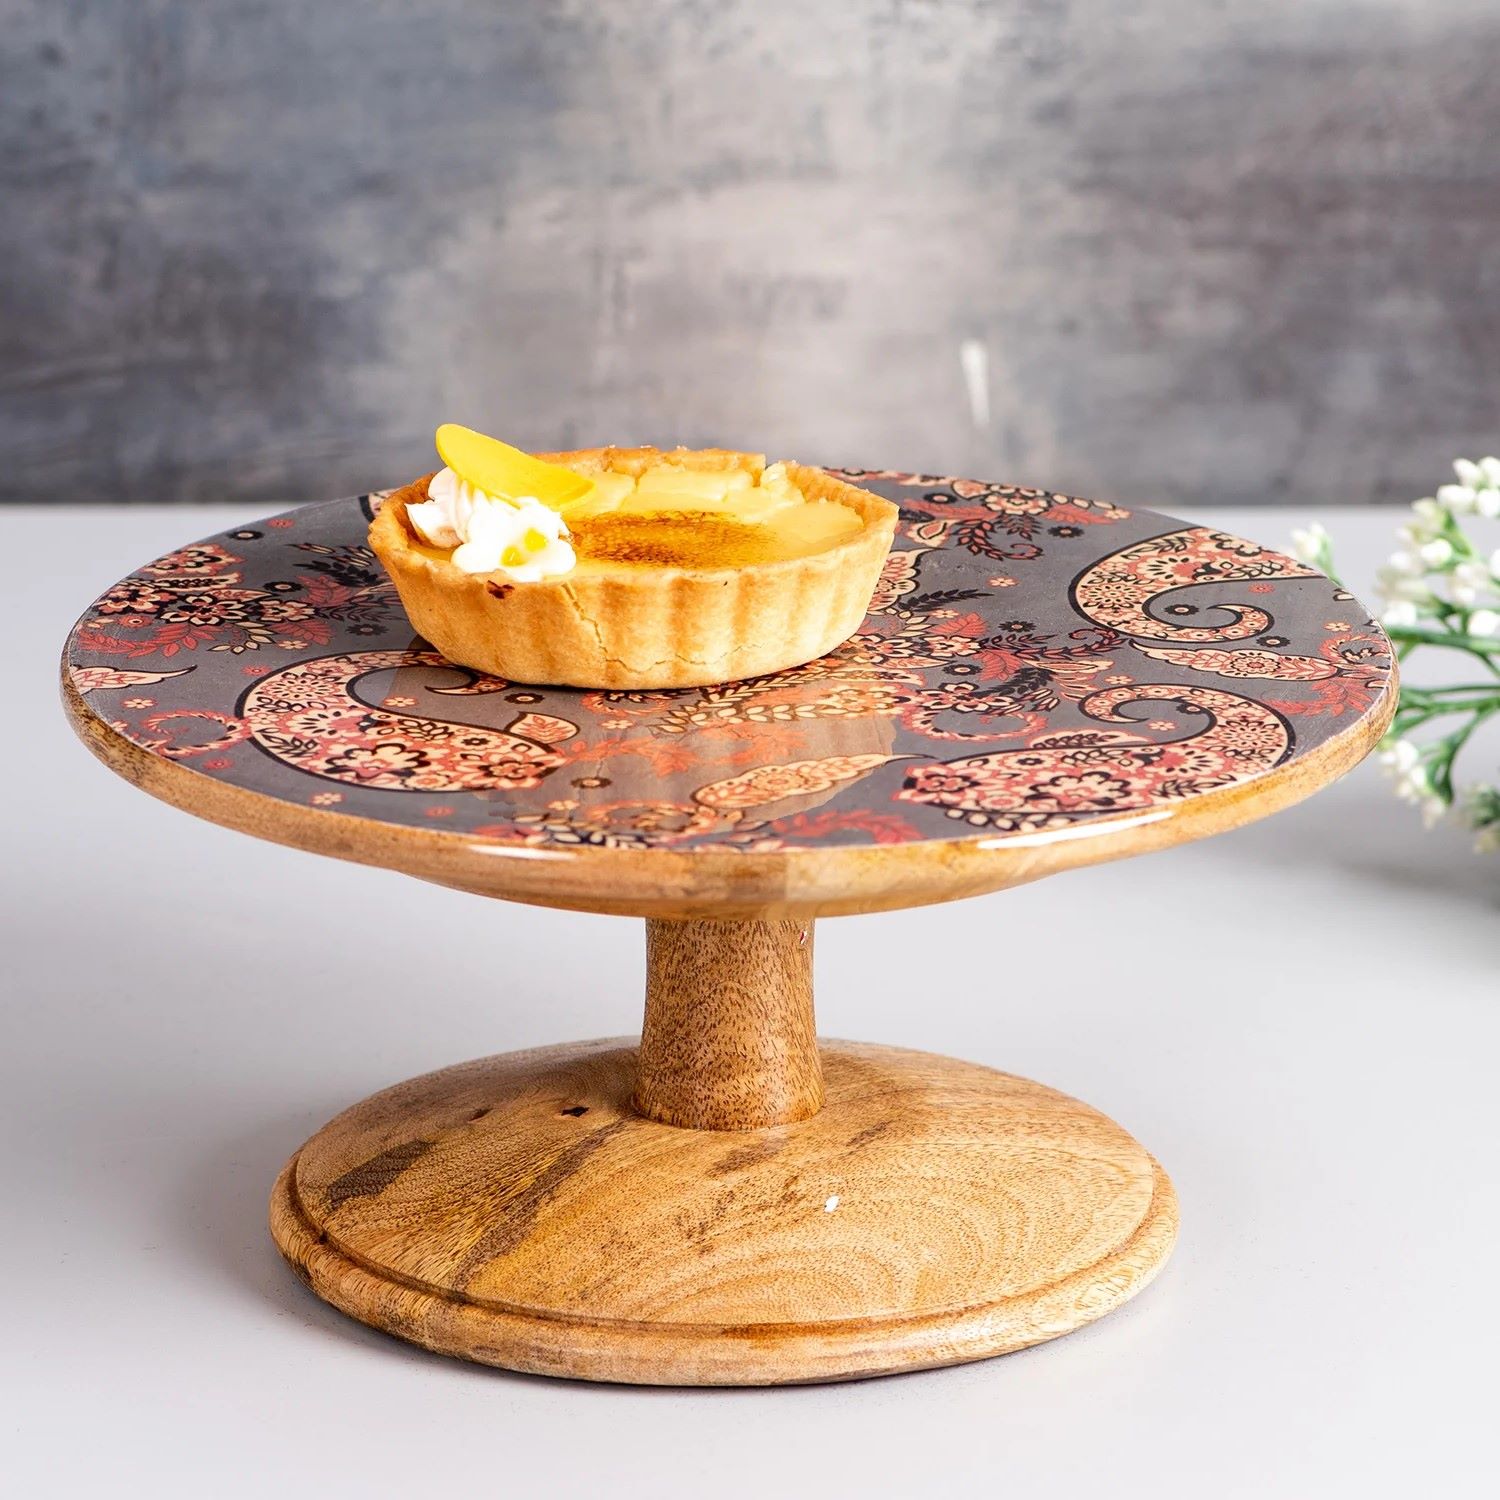 Top Cake Stand Review: Find the Perfect Stand for Your Baked Creations